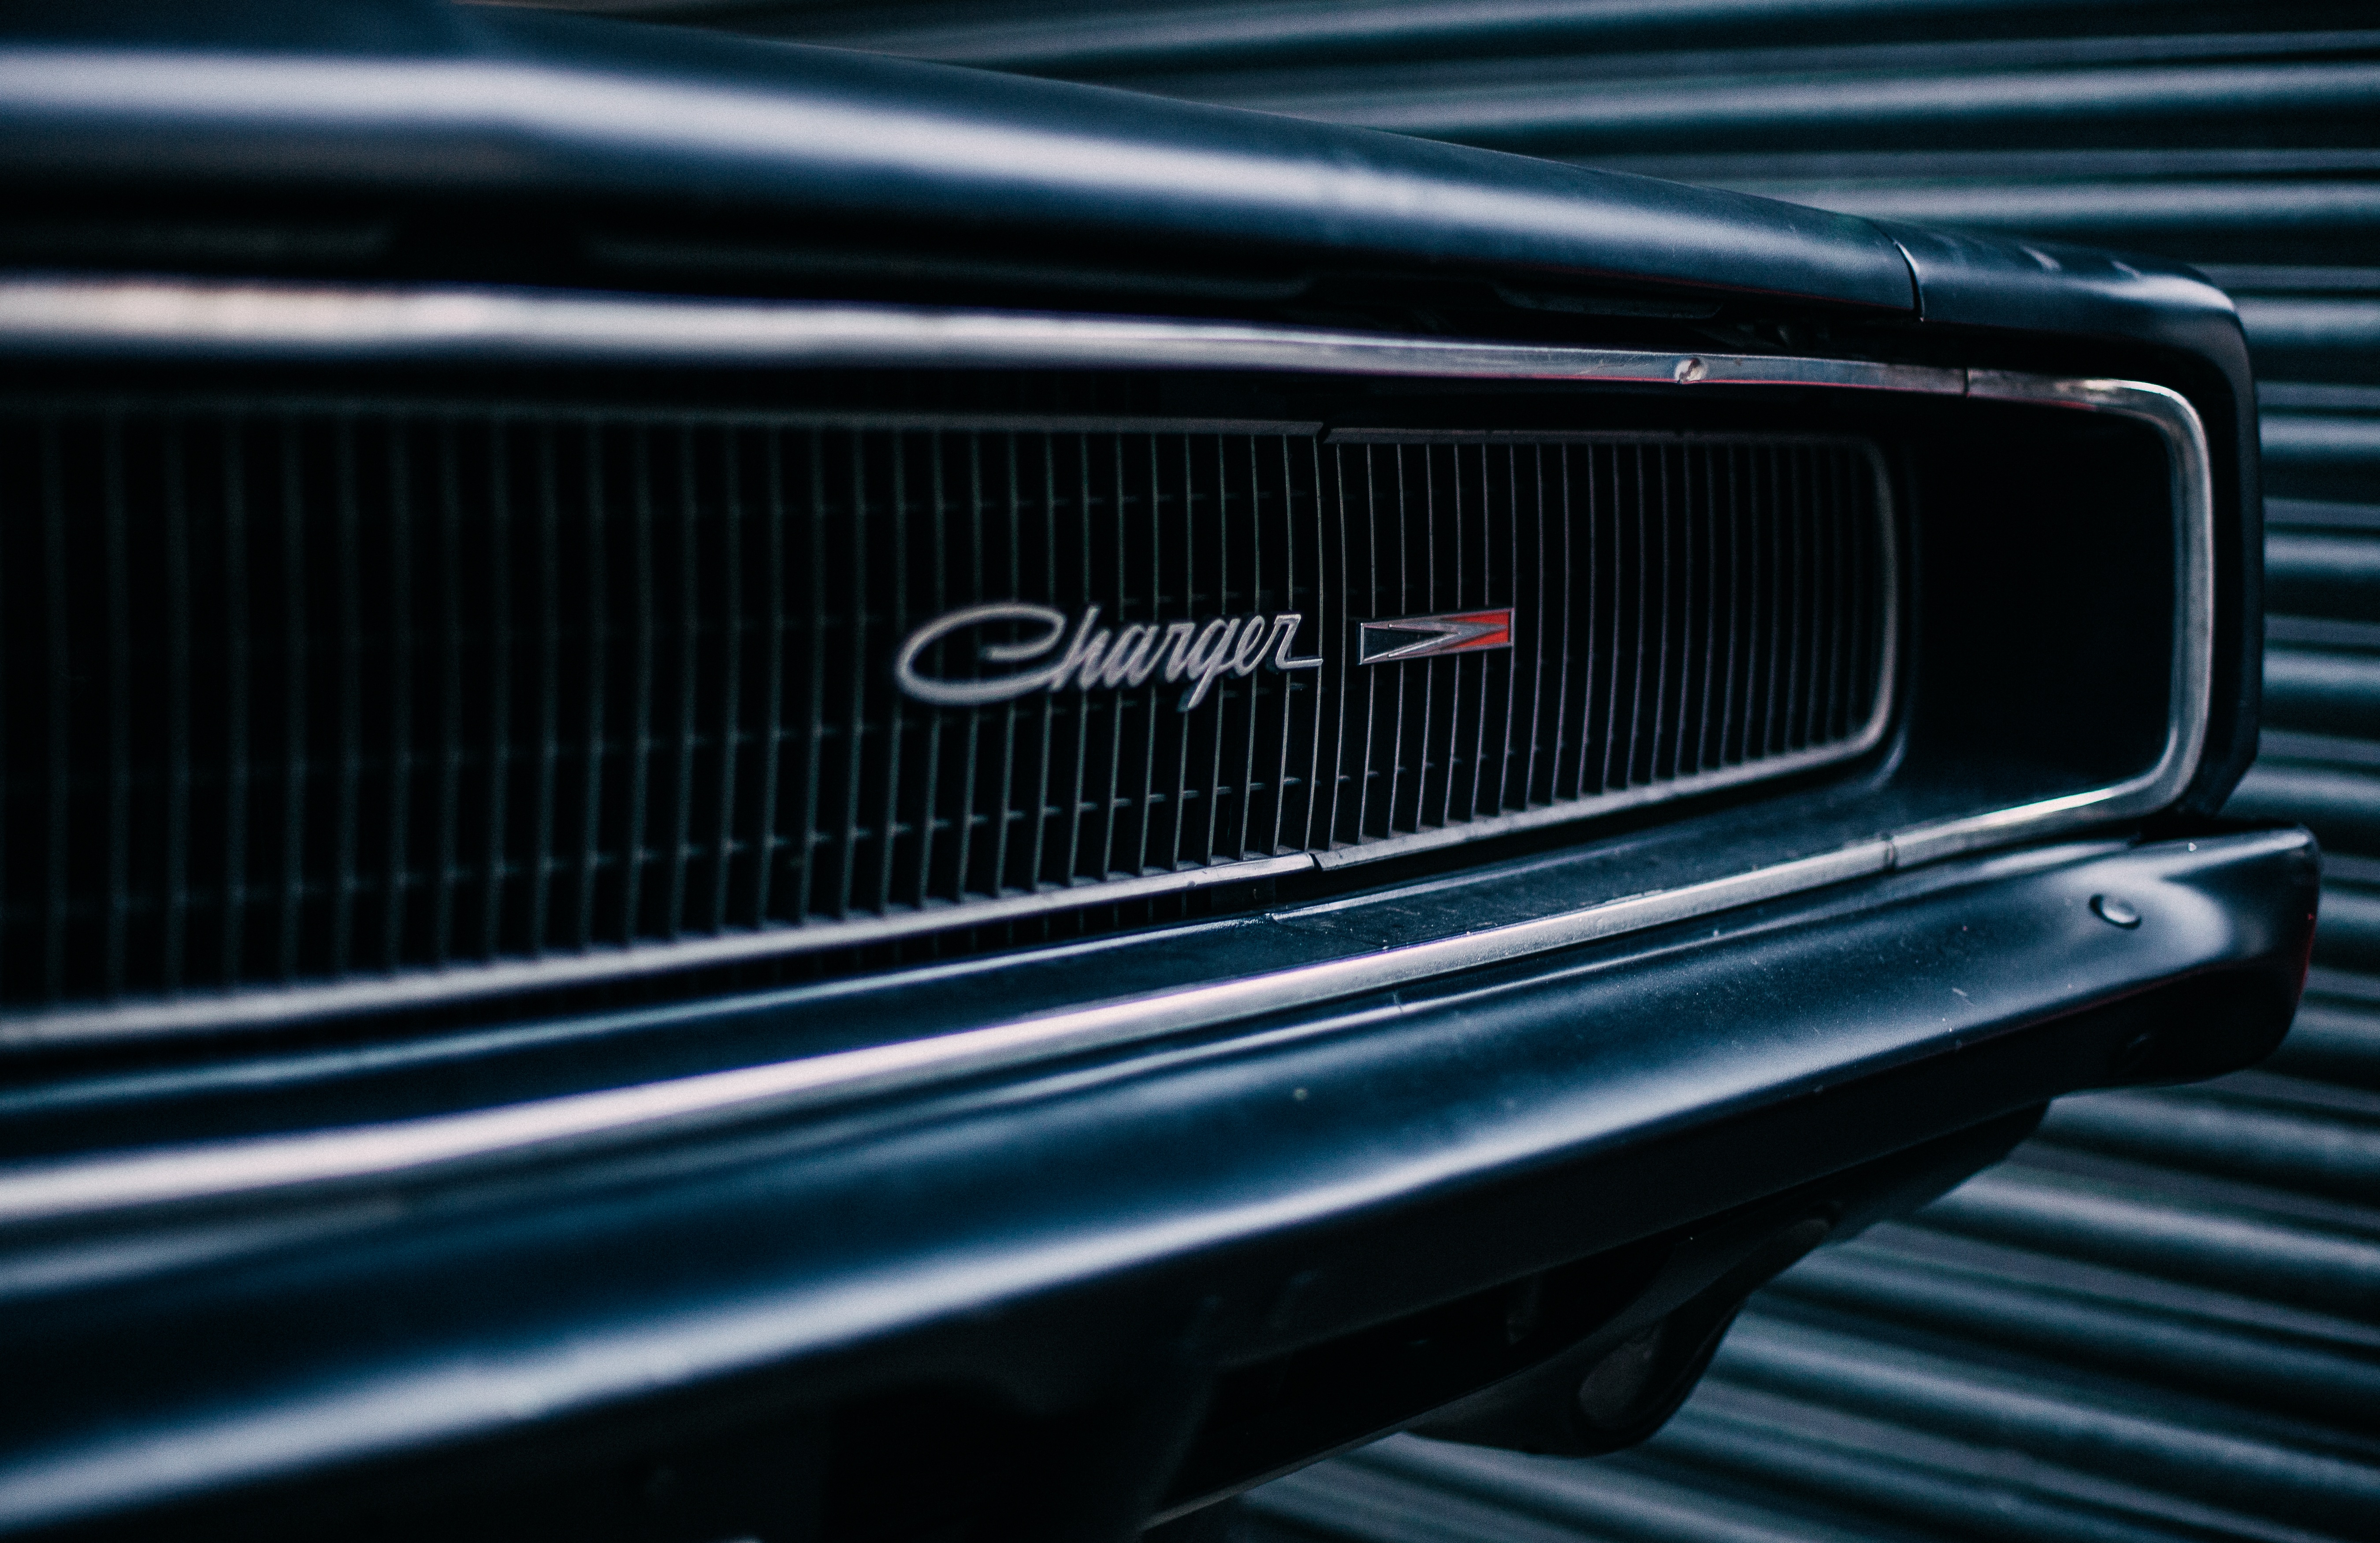 80818 download wallpaper cars, dodge charger, front bumper, logo, logotype screensavers and pictures for free